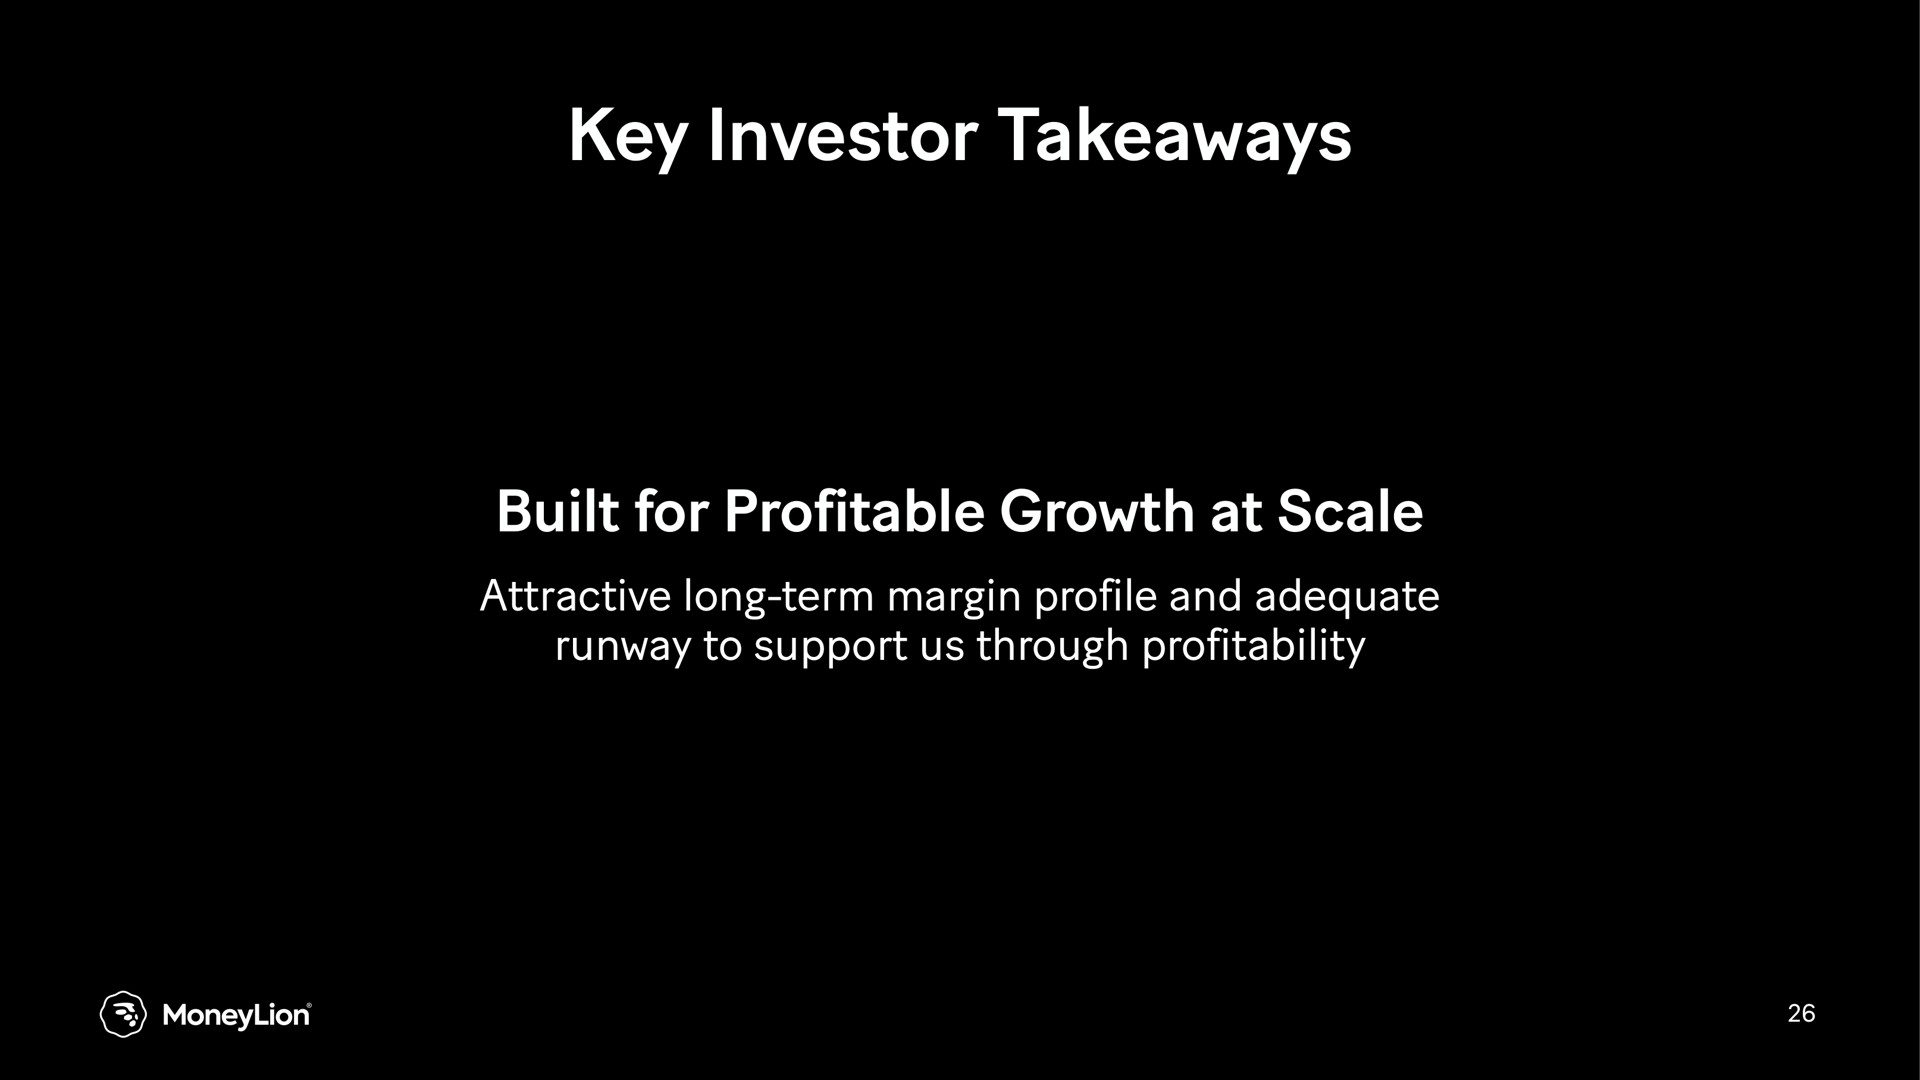 key investor built for profitable growth at scale | MoneyLion